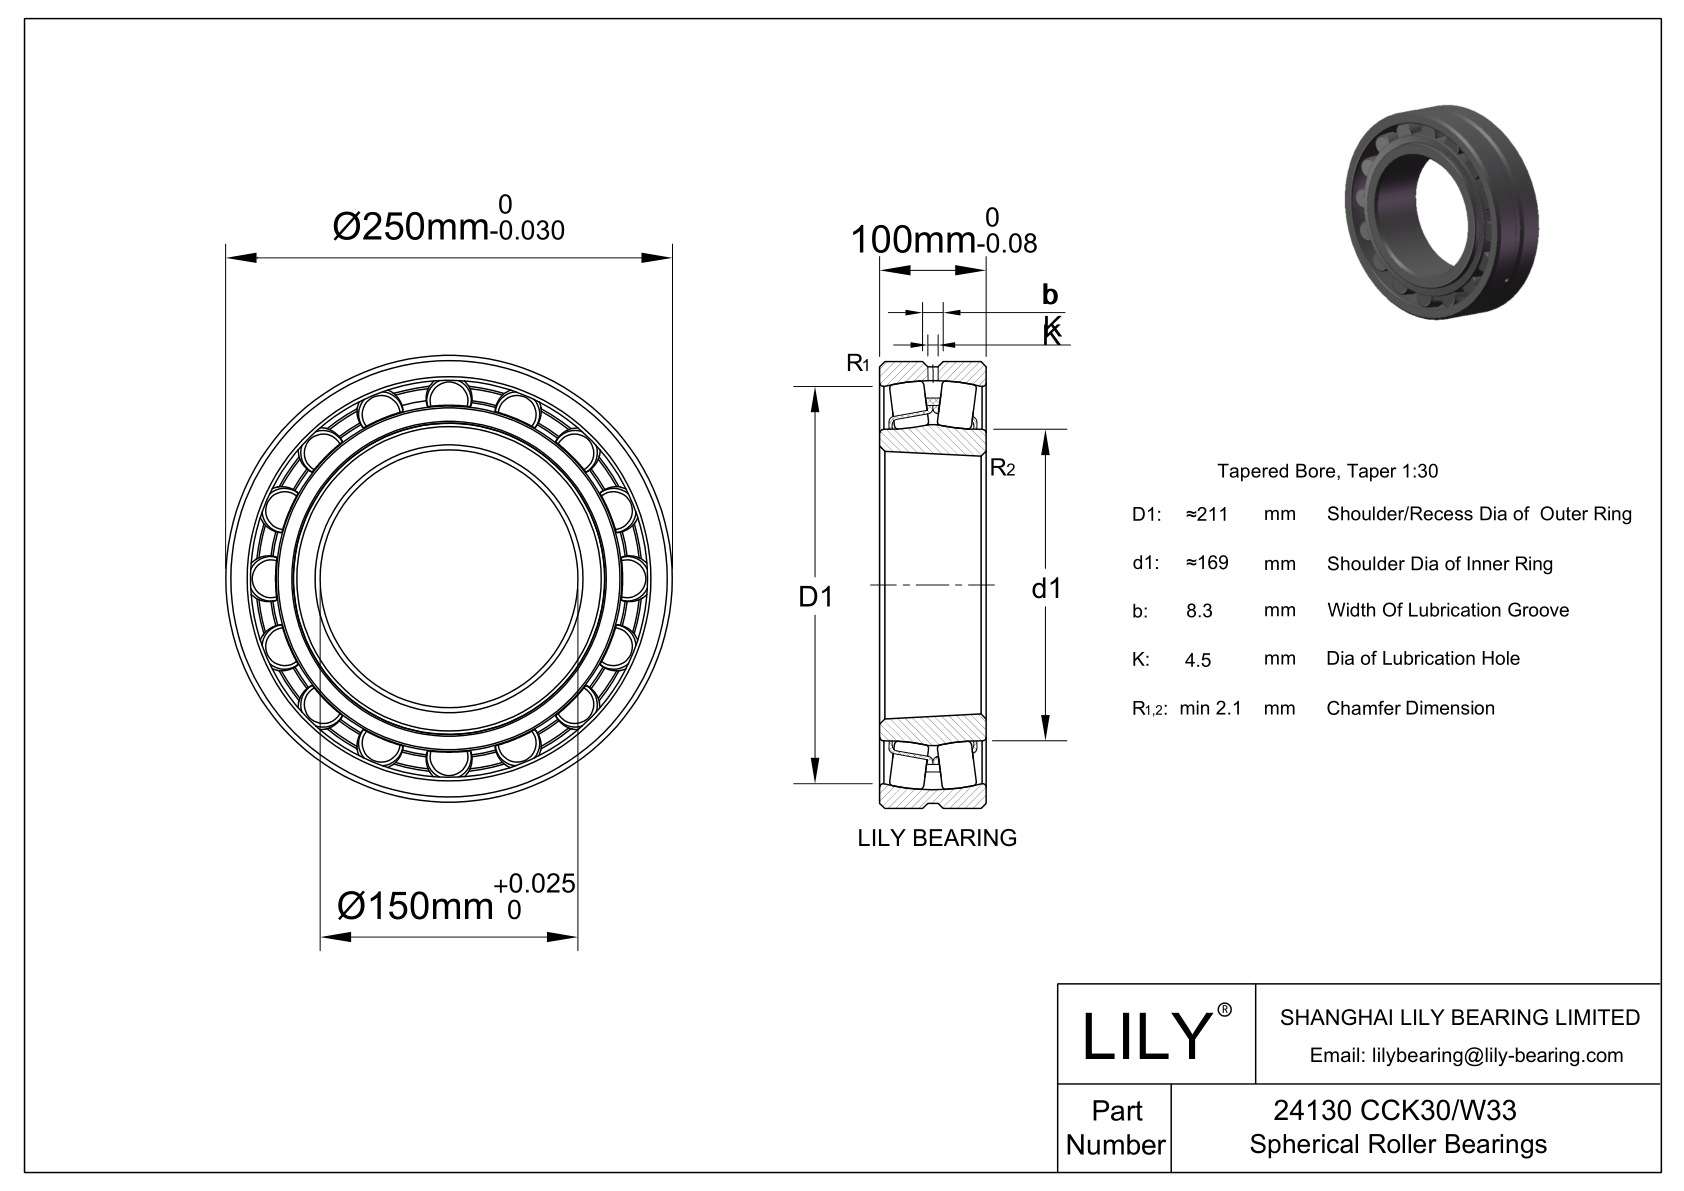 24130 CCK30/W33 Double Row Spherical Roller Bearing cad drawing